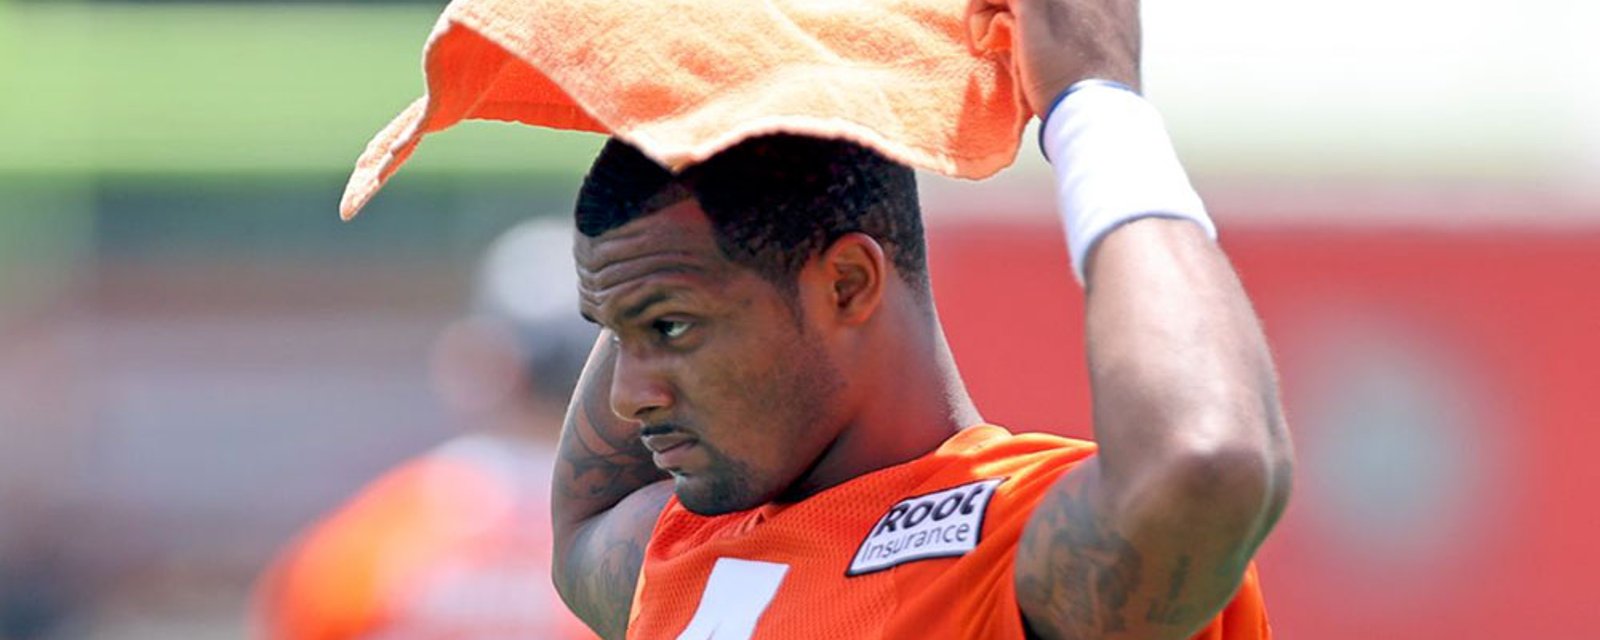 Cleveland Browns offer classy response to Deshaun Watson's suspension 